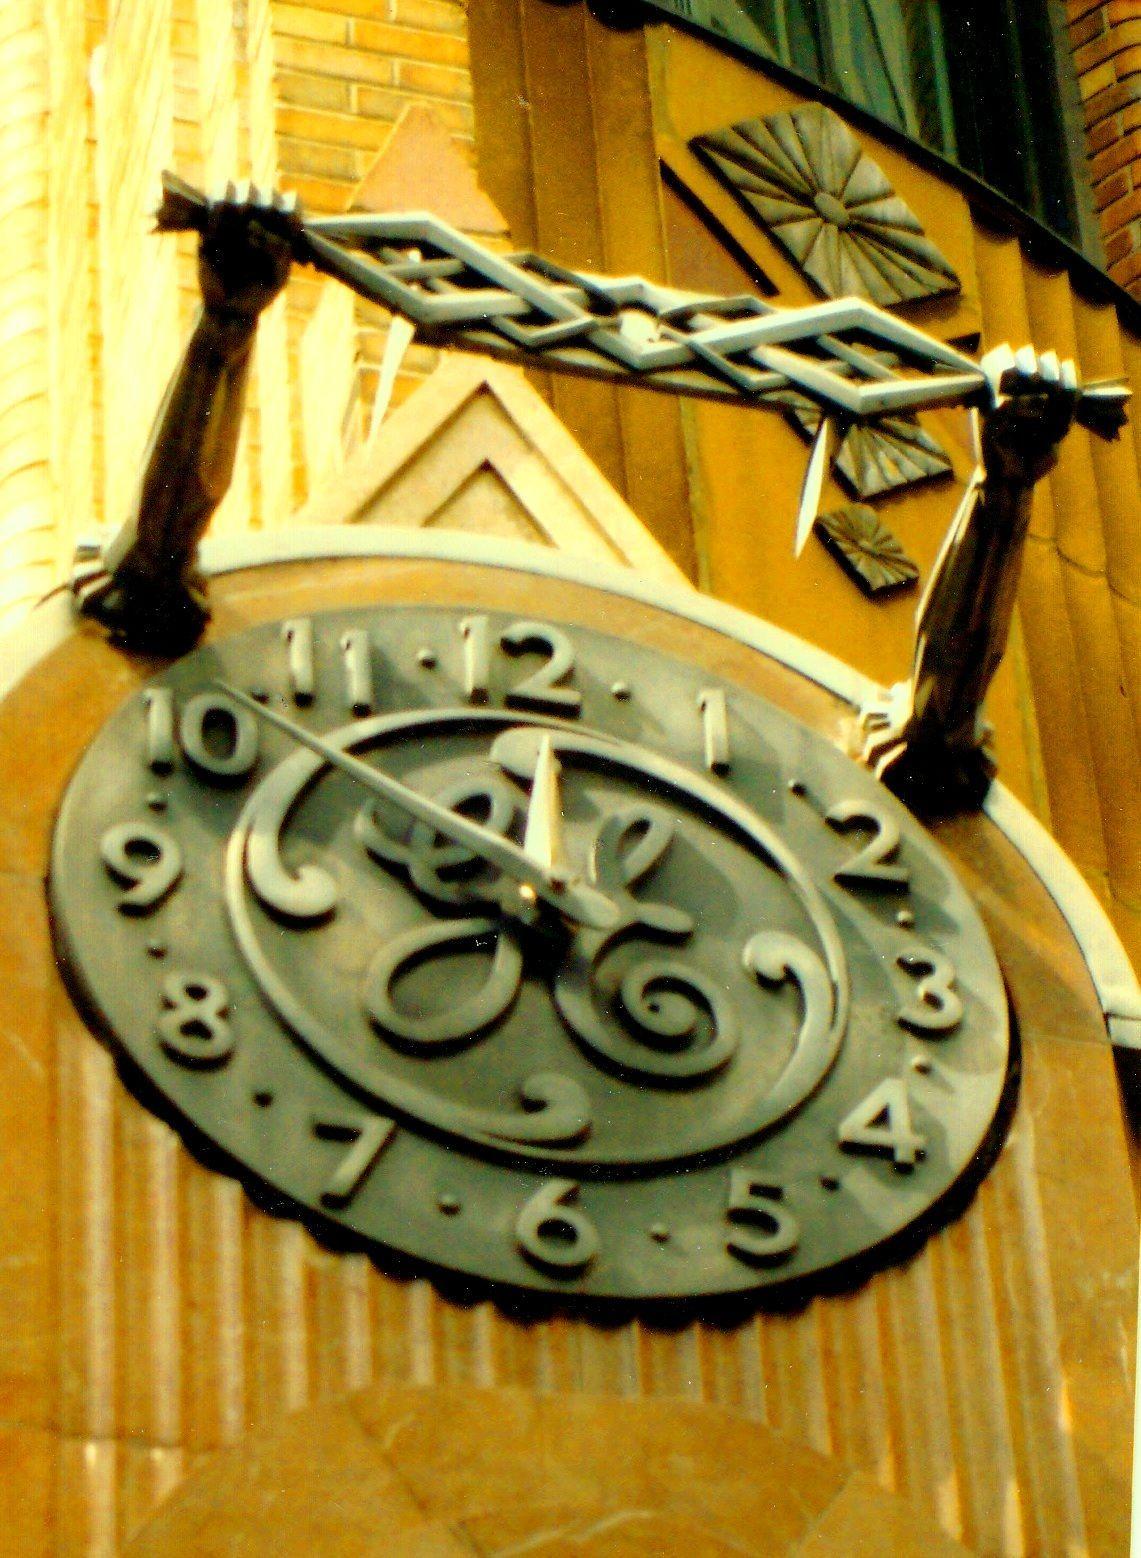 Old General Electric Logo - The General Electric logo dates from this clock from